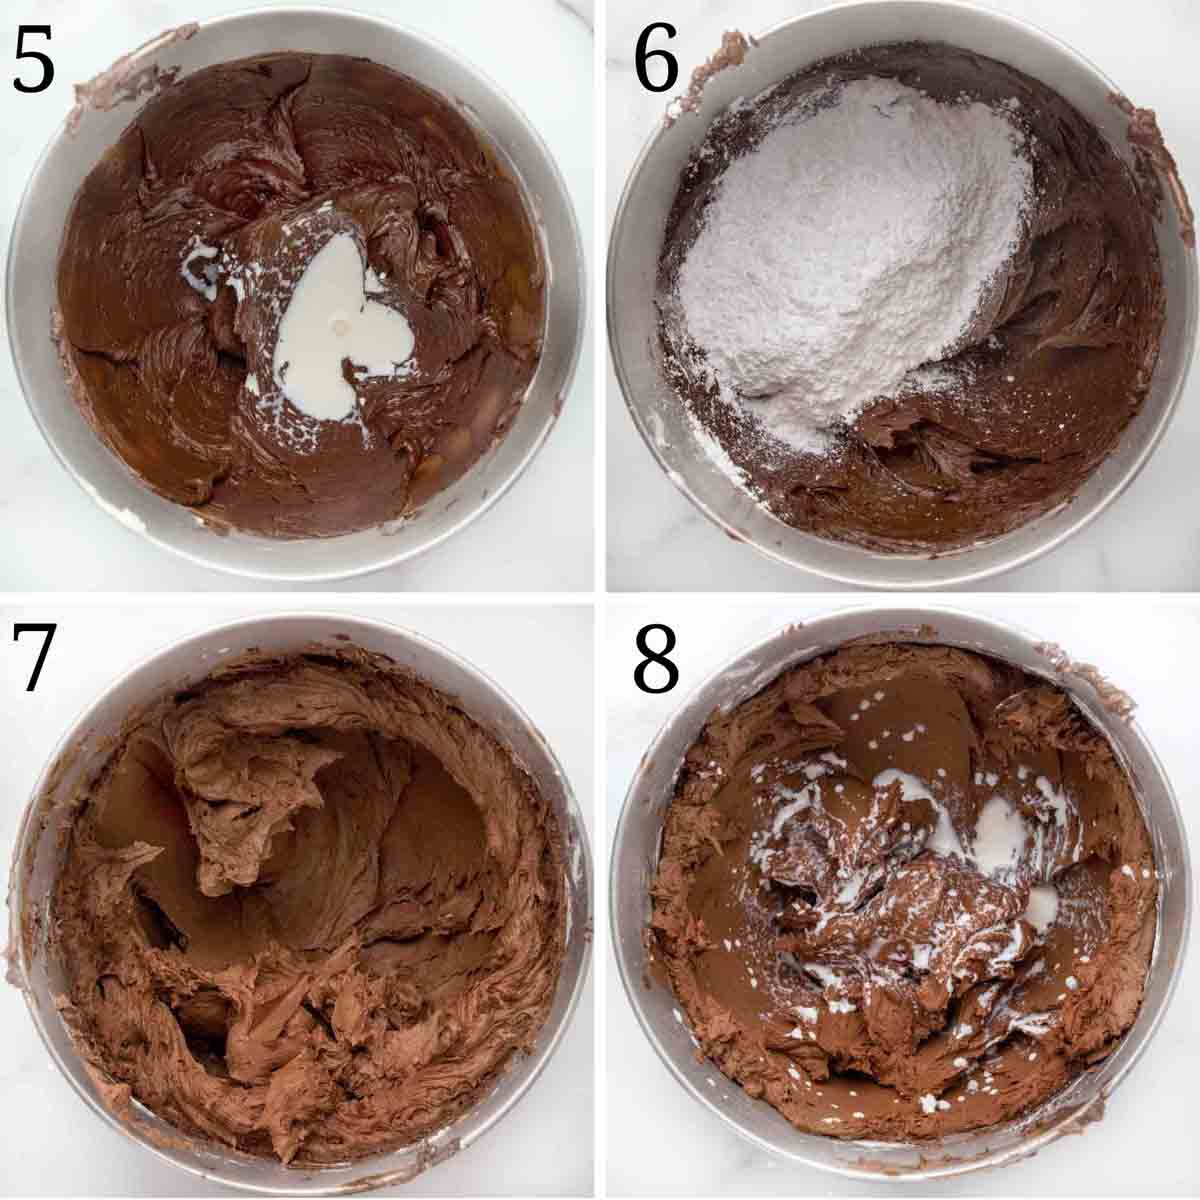 four images showing how to finish making the chocolate buttercream frosting